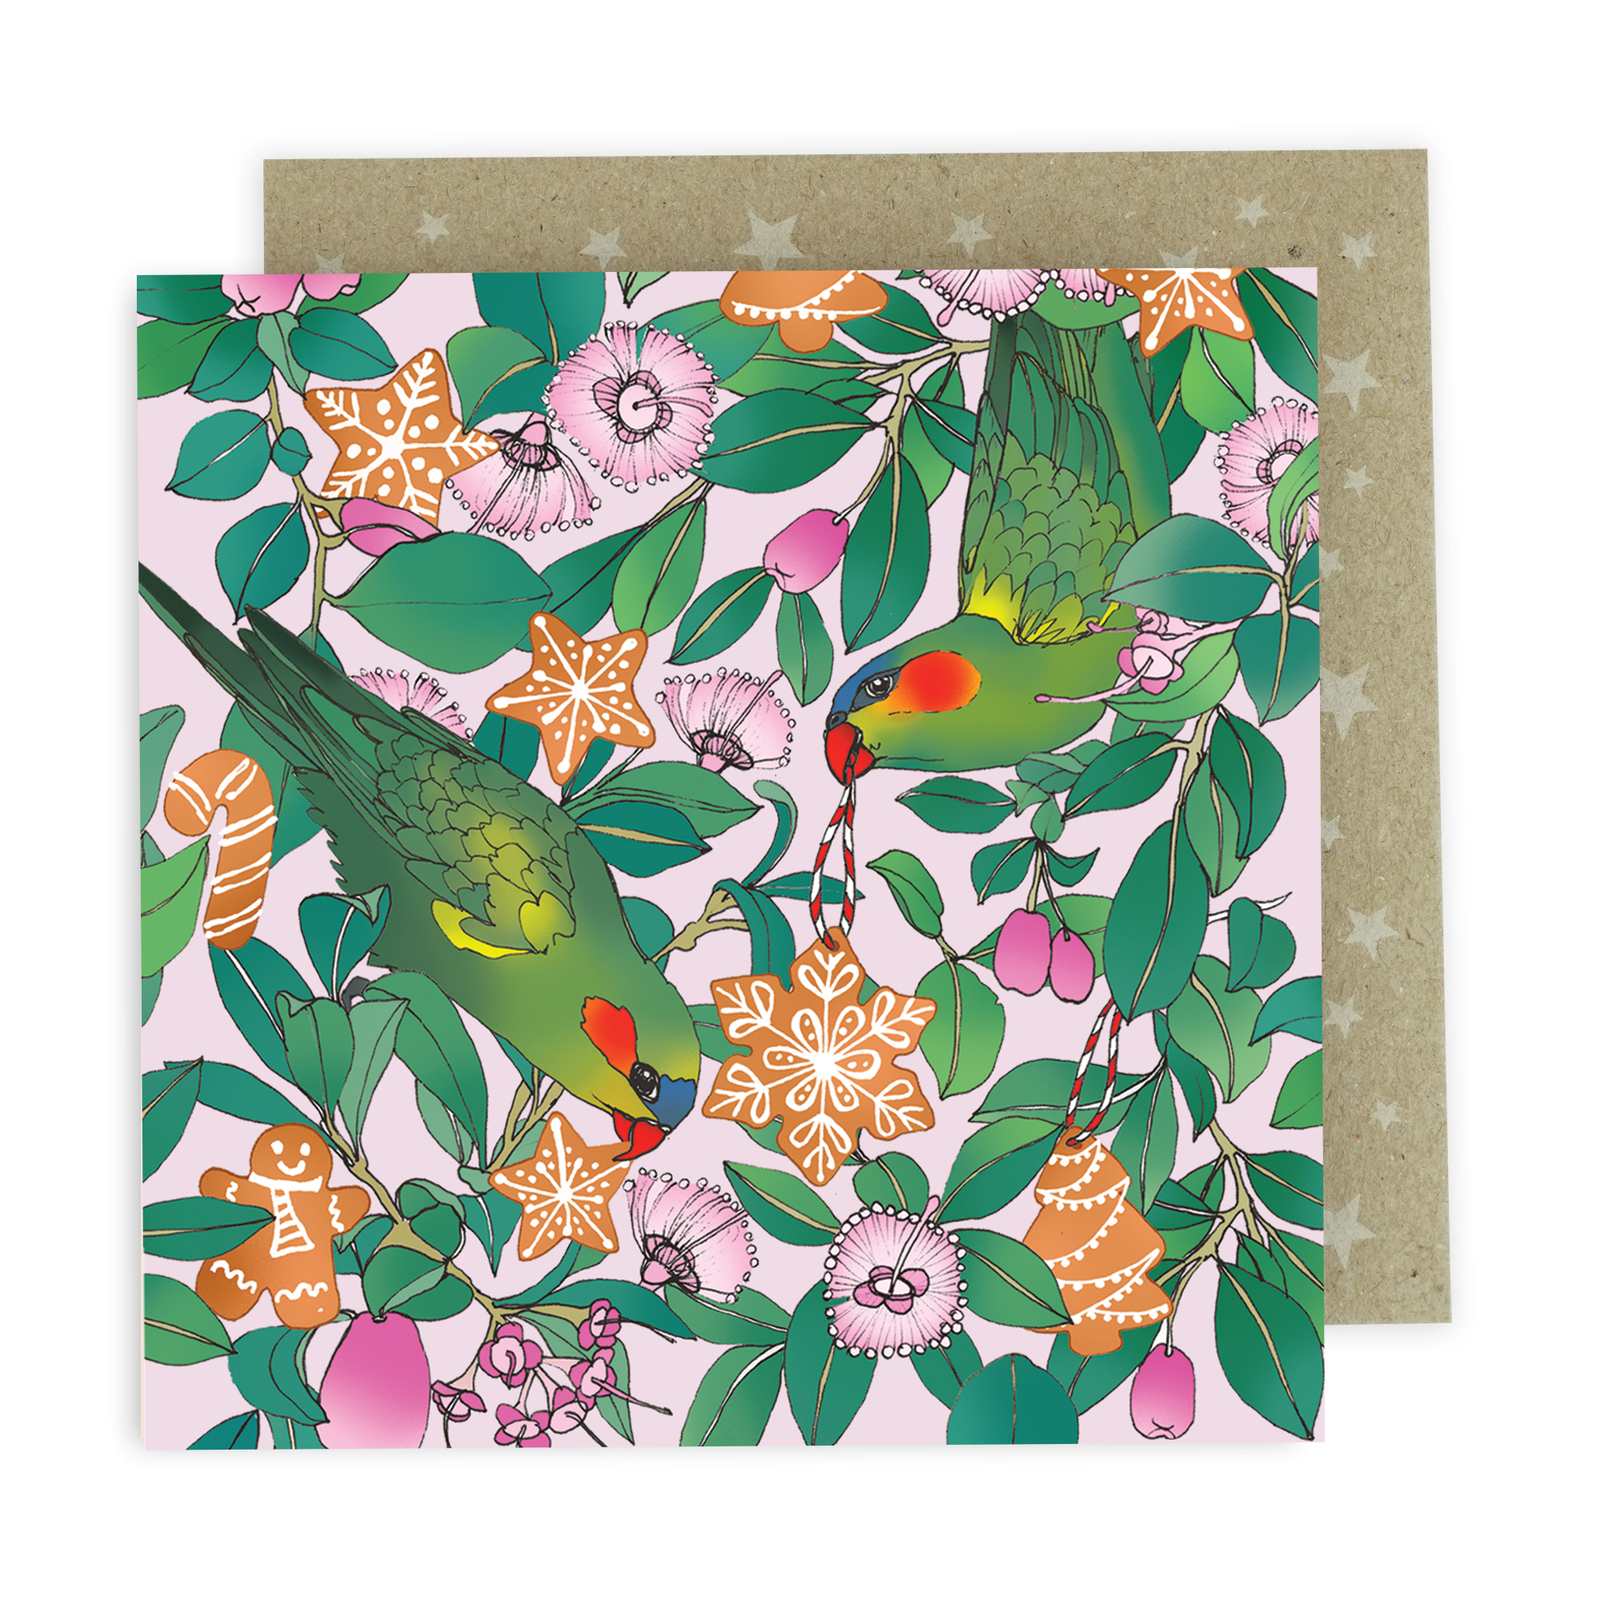 Boxed Christmas Cards (Square) - Lorikeets & Lilly Pilly 